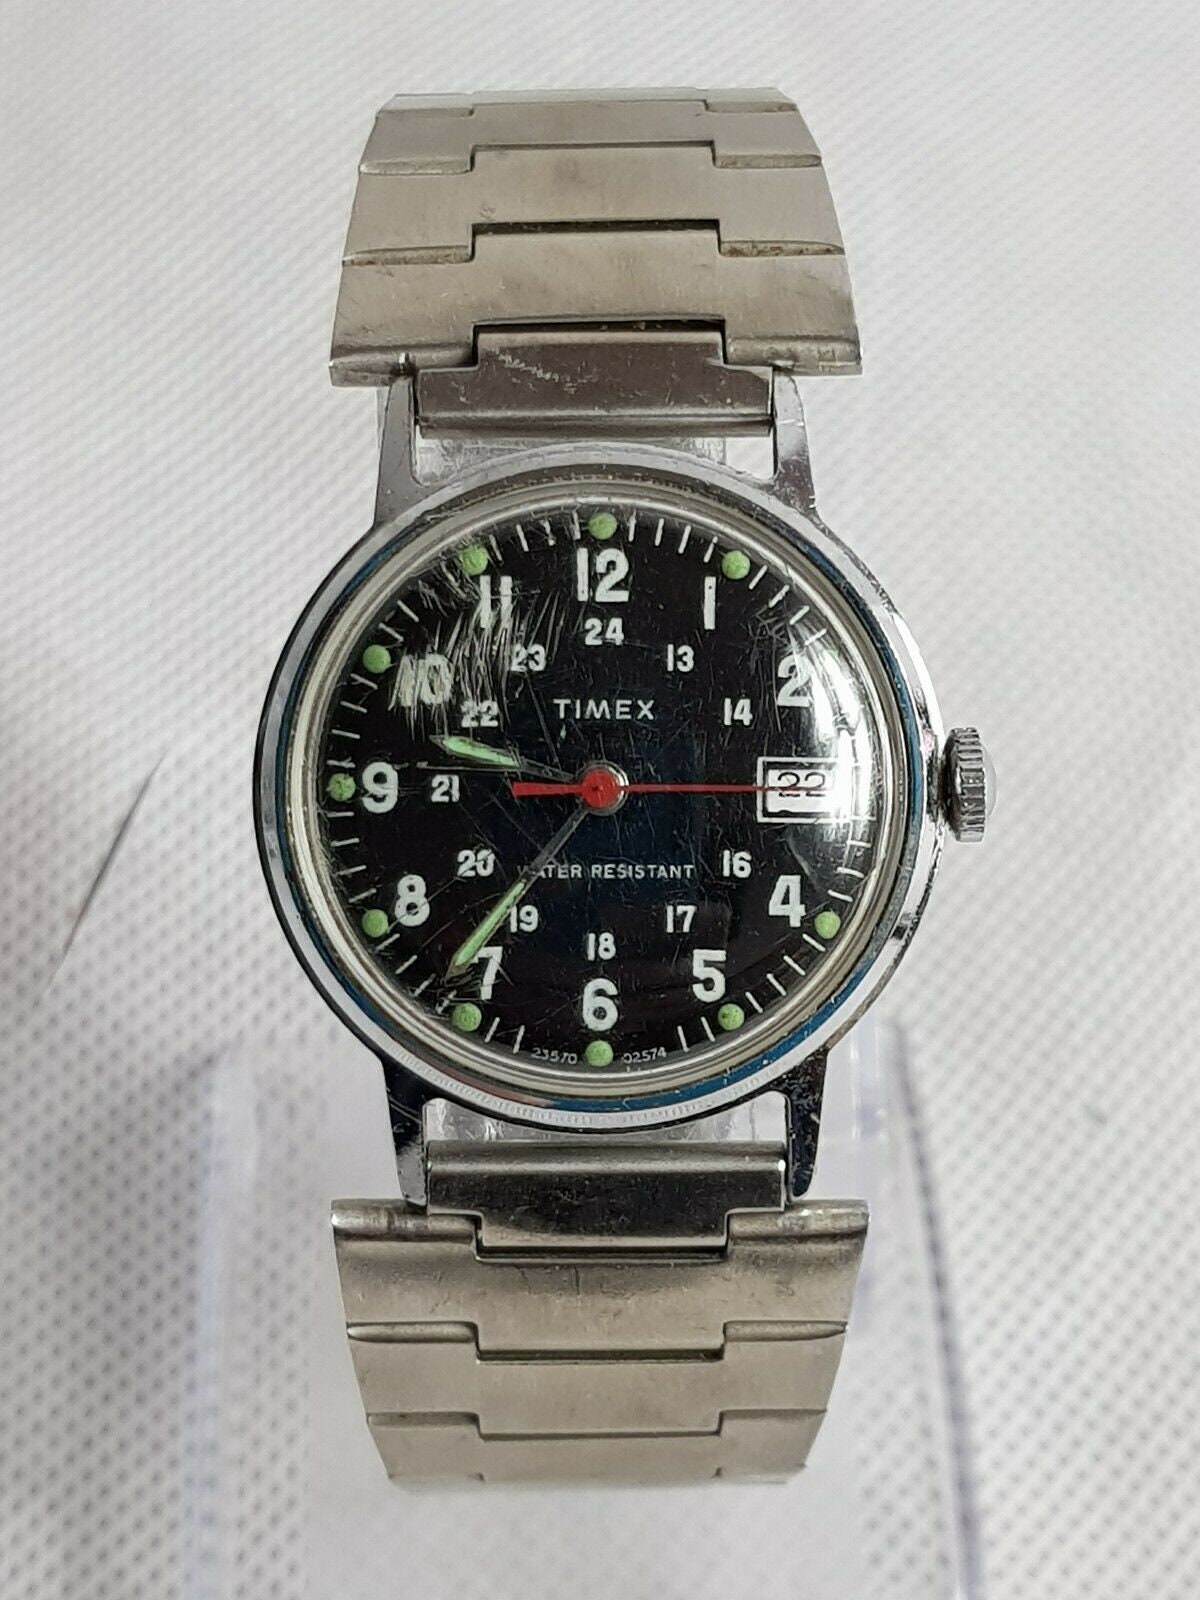 Vintage Timex Military Style Mechanical Watch - Etsy